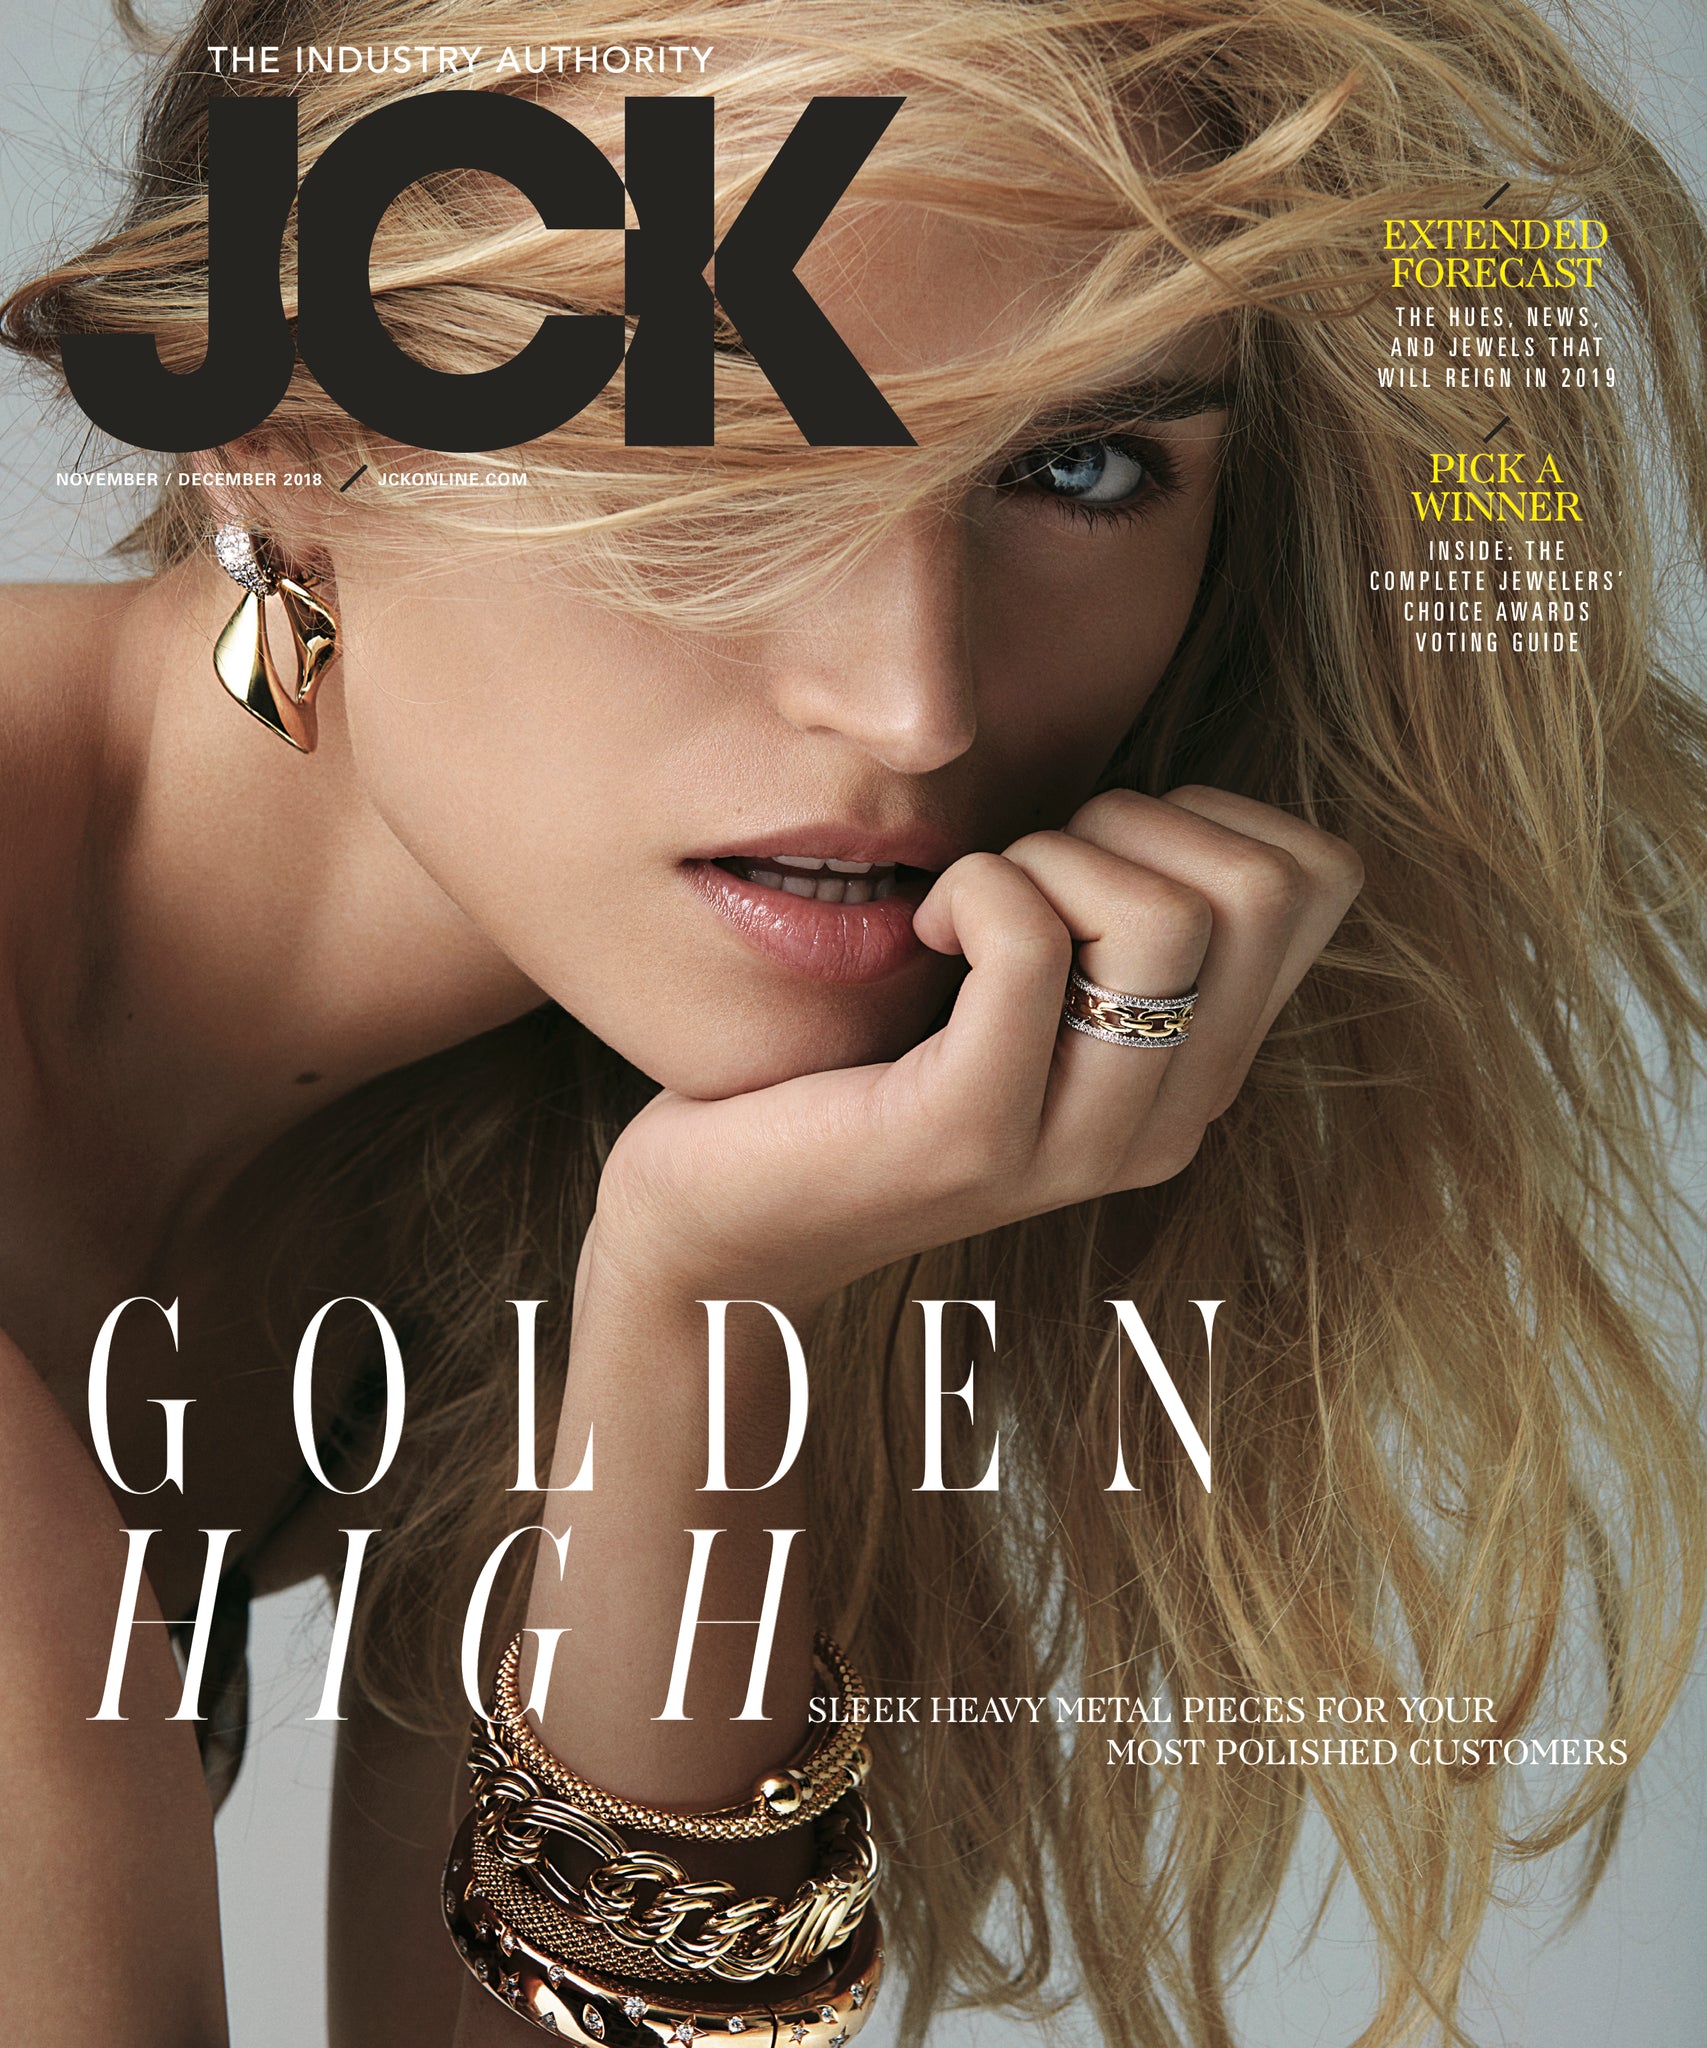 Oversized Hammered Gold Click Hinge Hoops featured in JCK Magazine Nov/Dec 2018 Issue